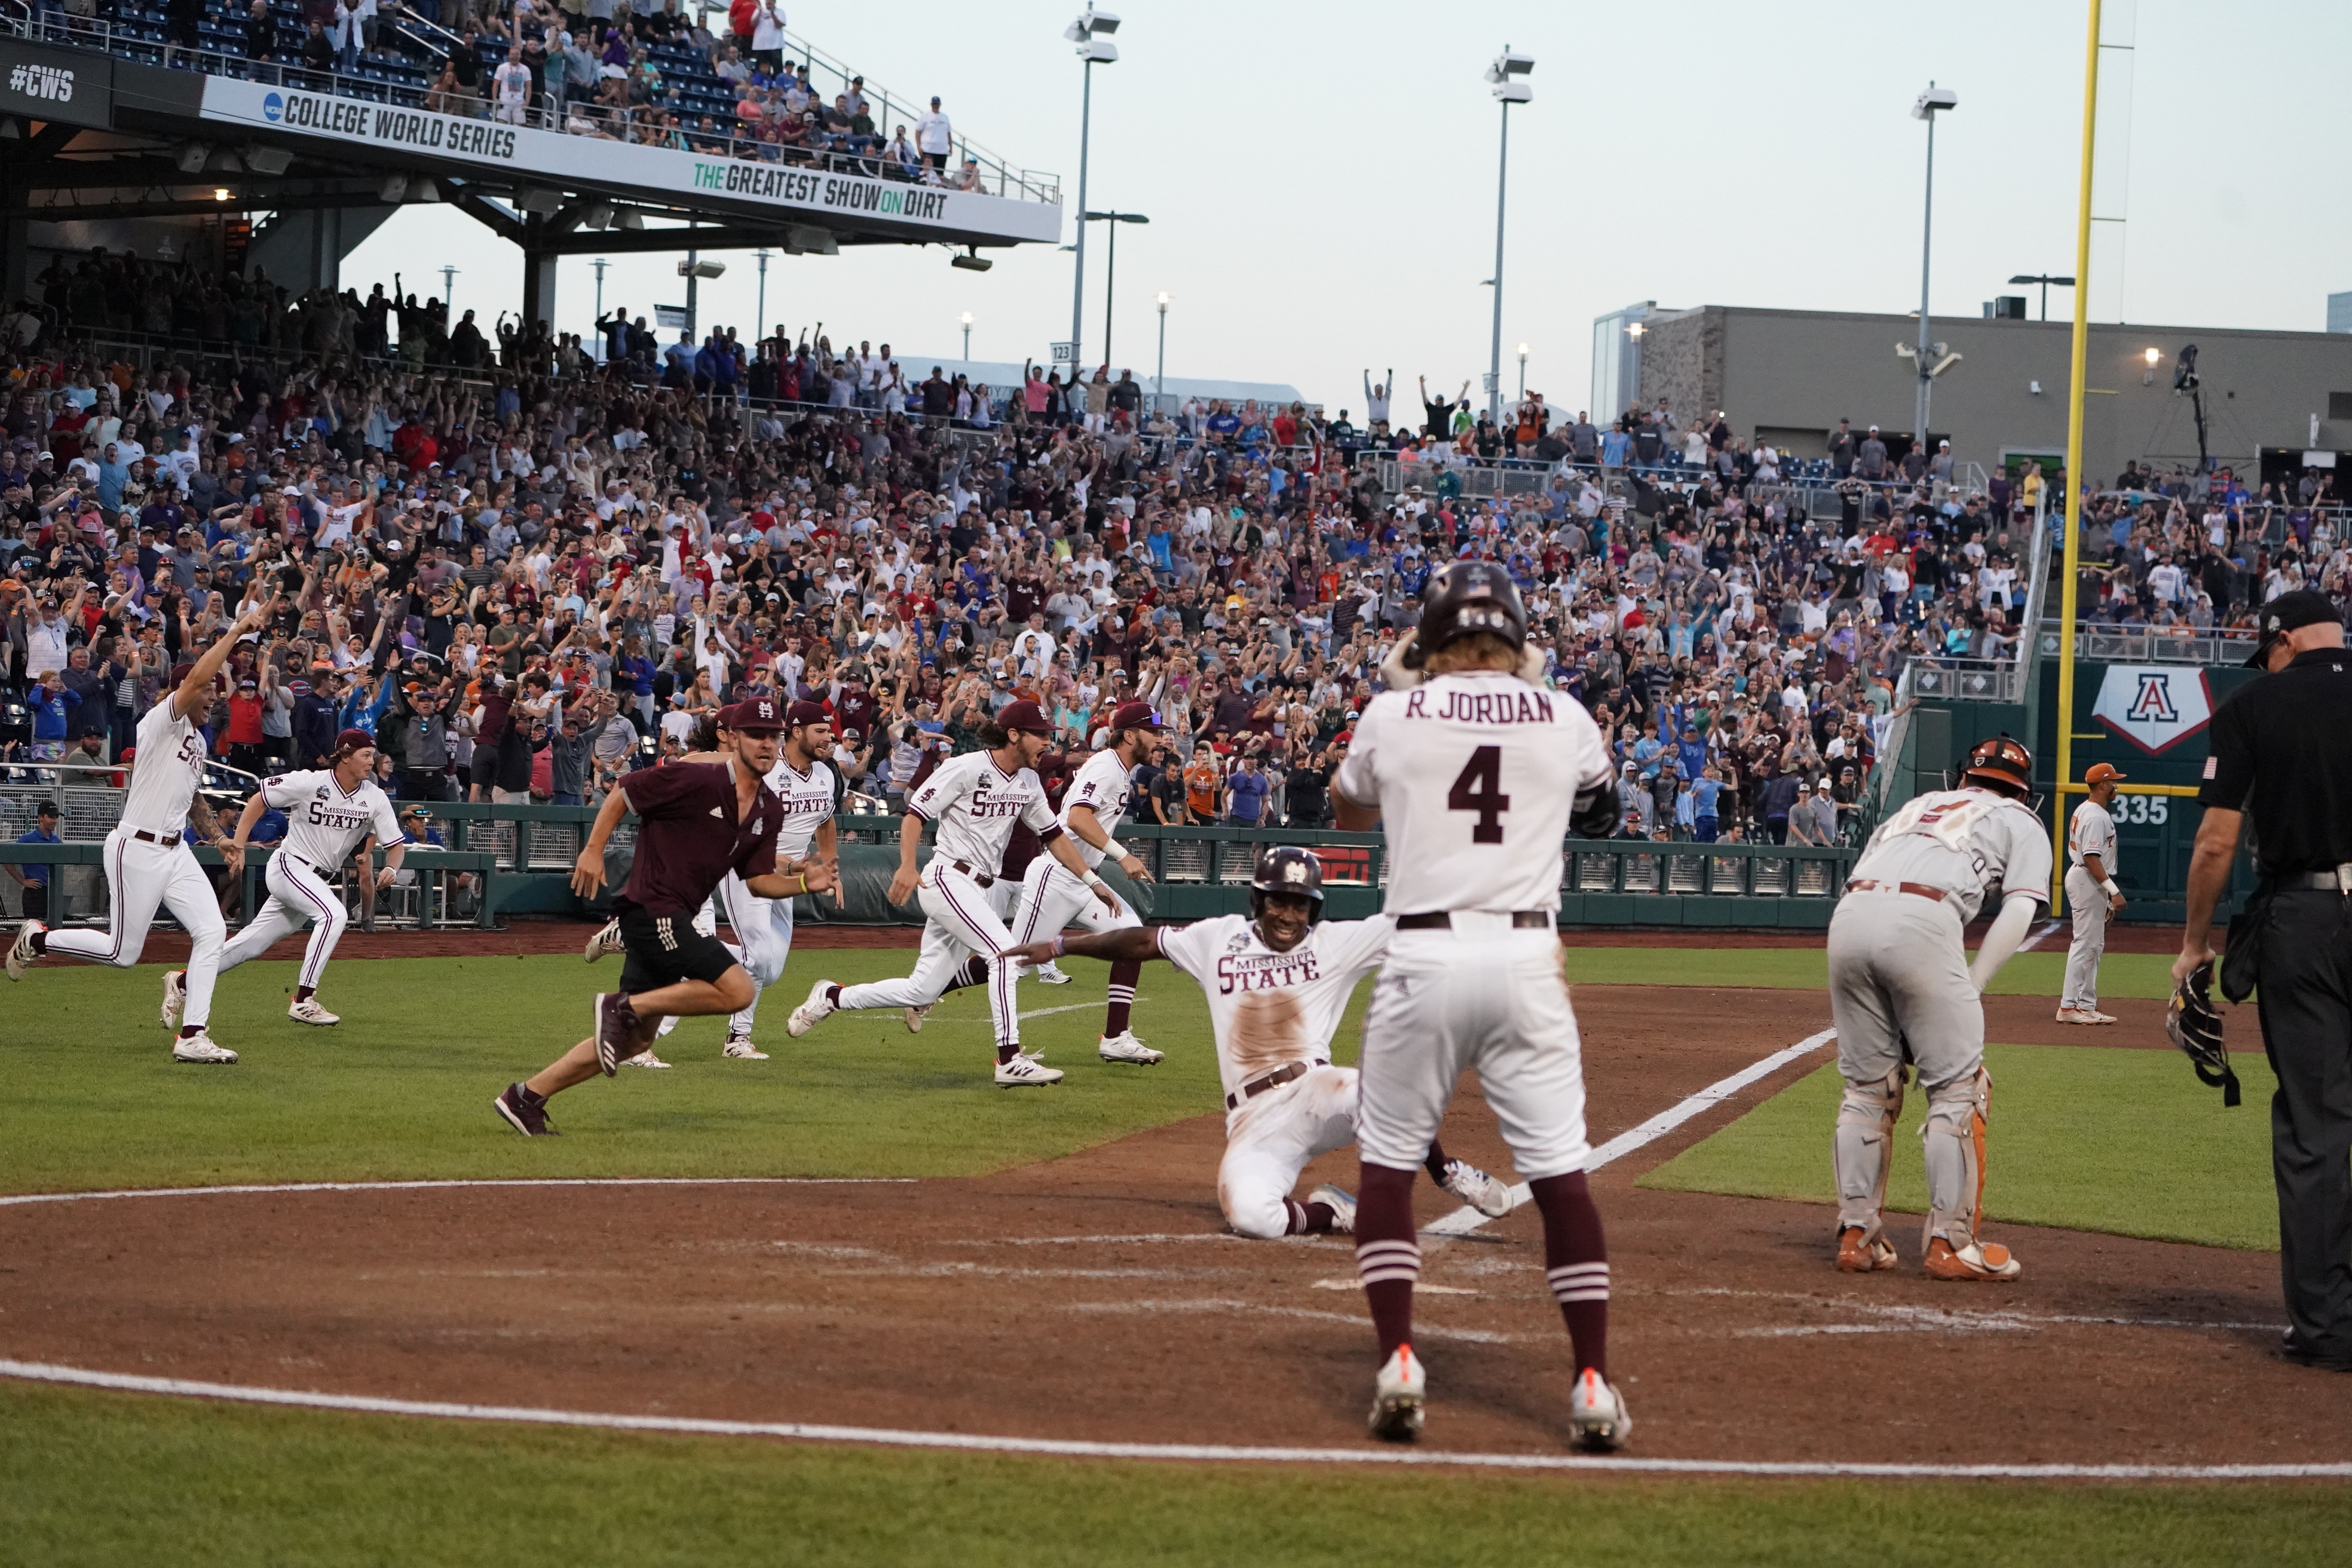 Tanner Leggett's walk-off RBI single puts Mississippi State into the CWS final